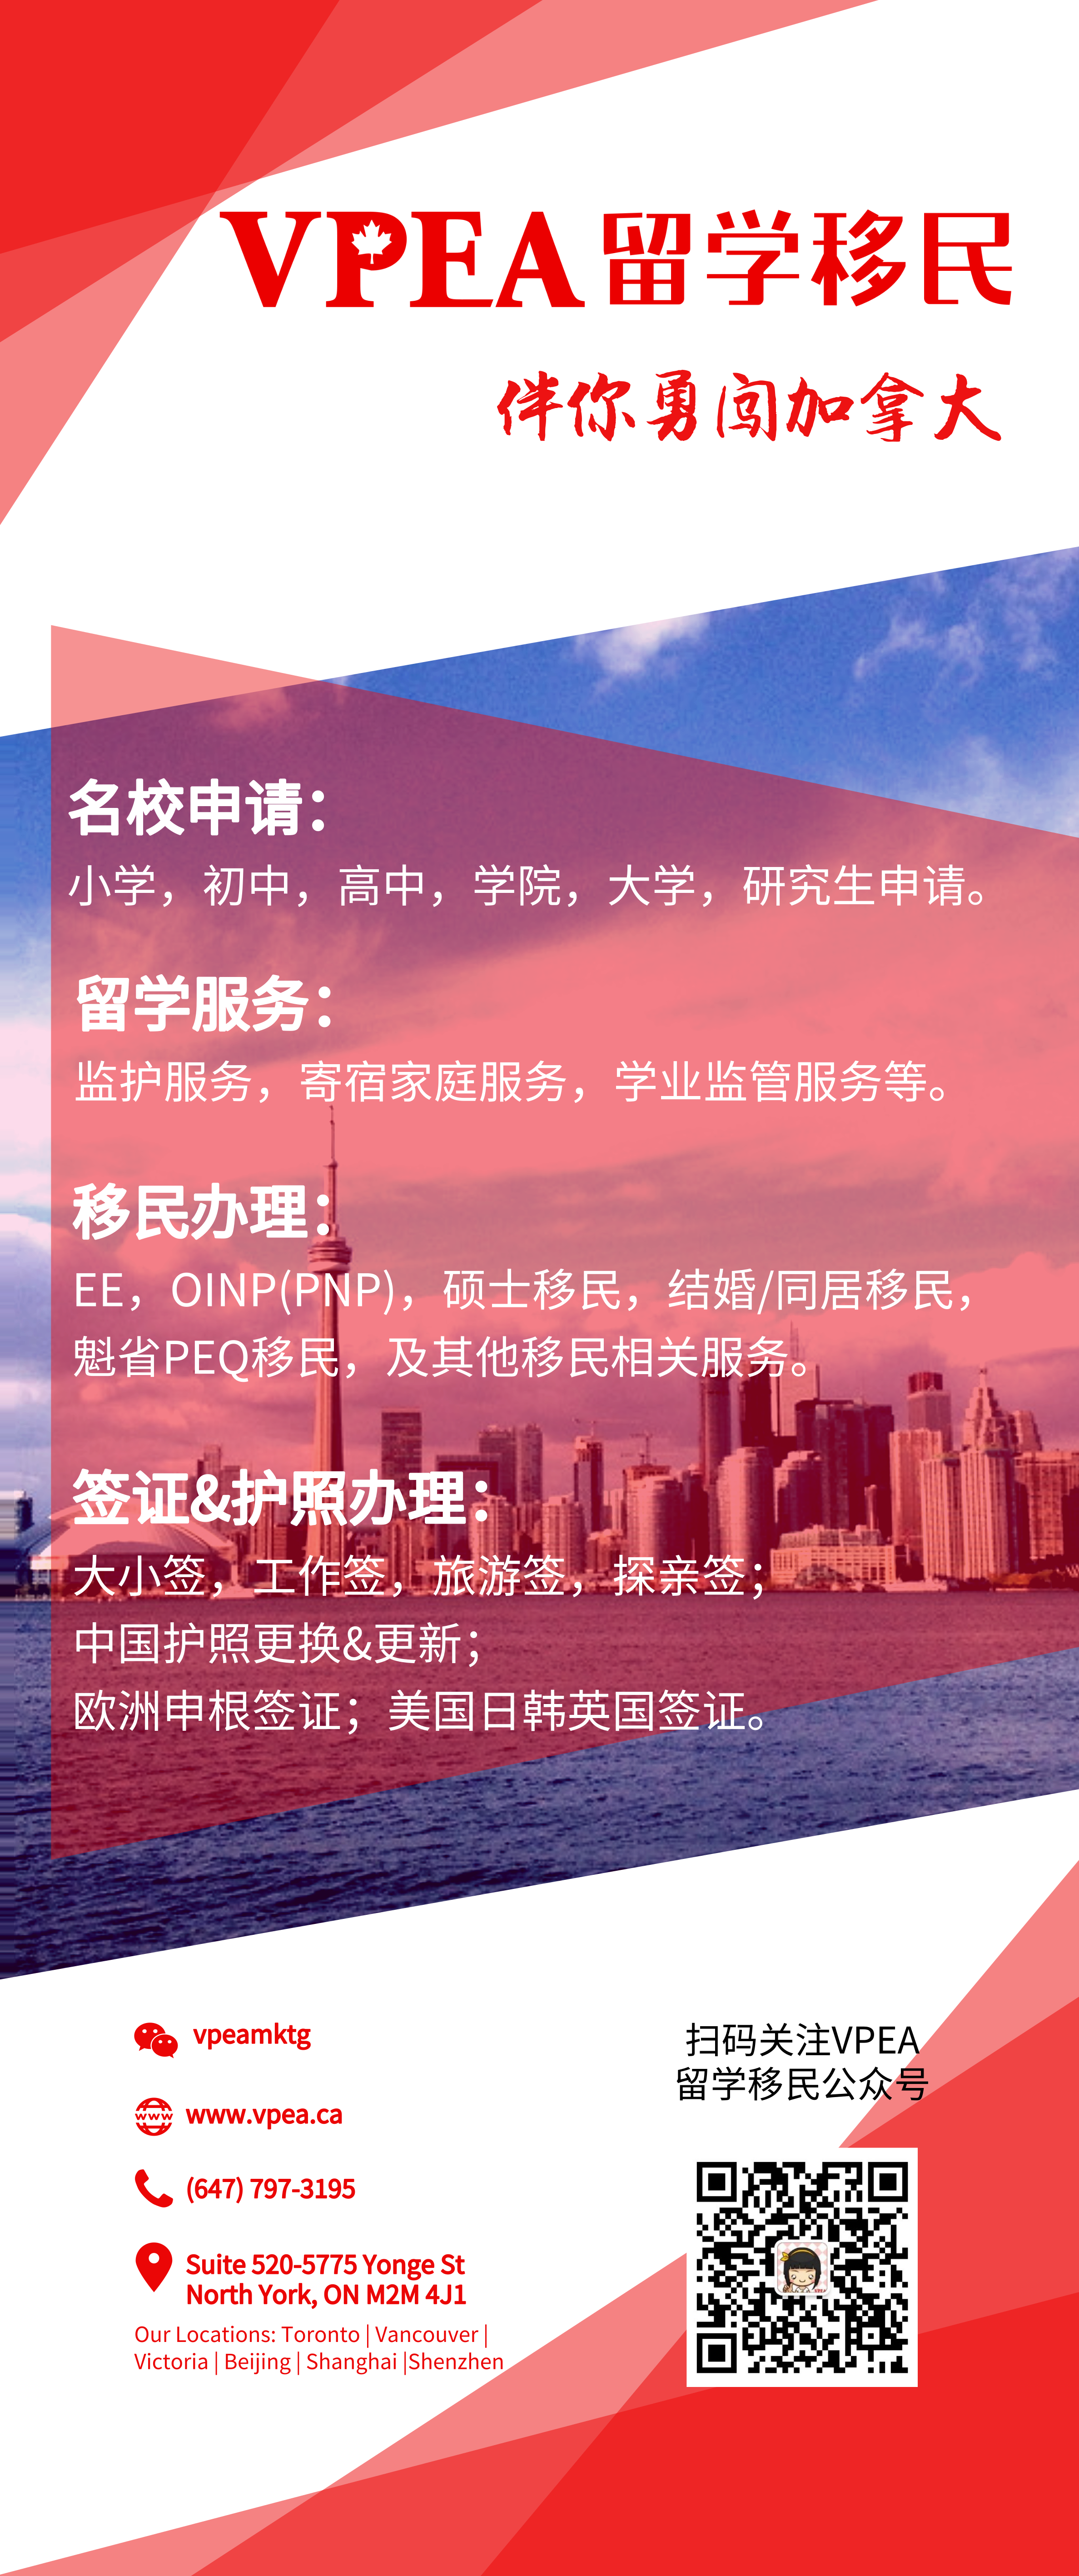 vpea易拉宝_自定义cm_2019.03.13.png